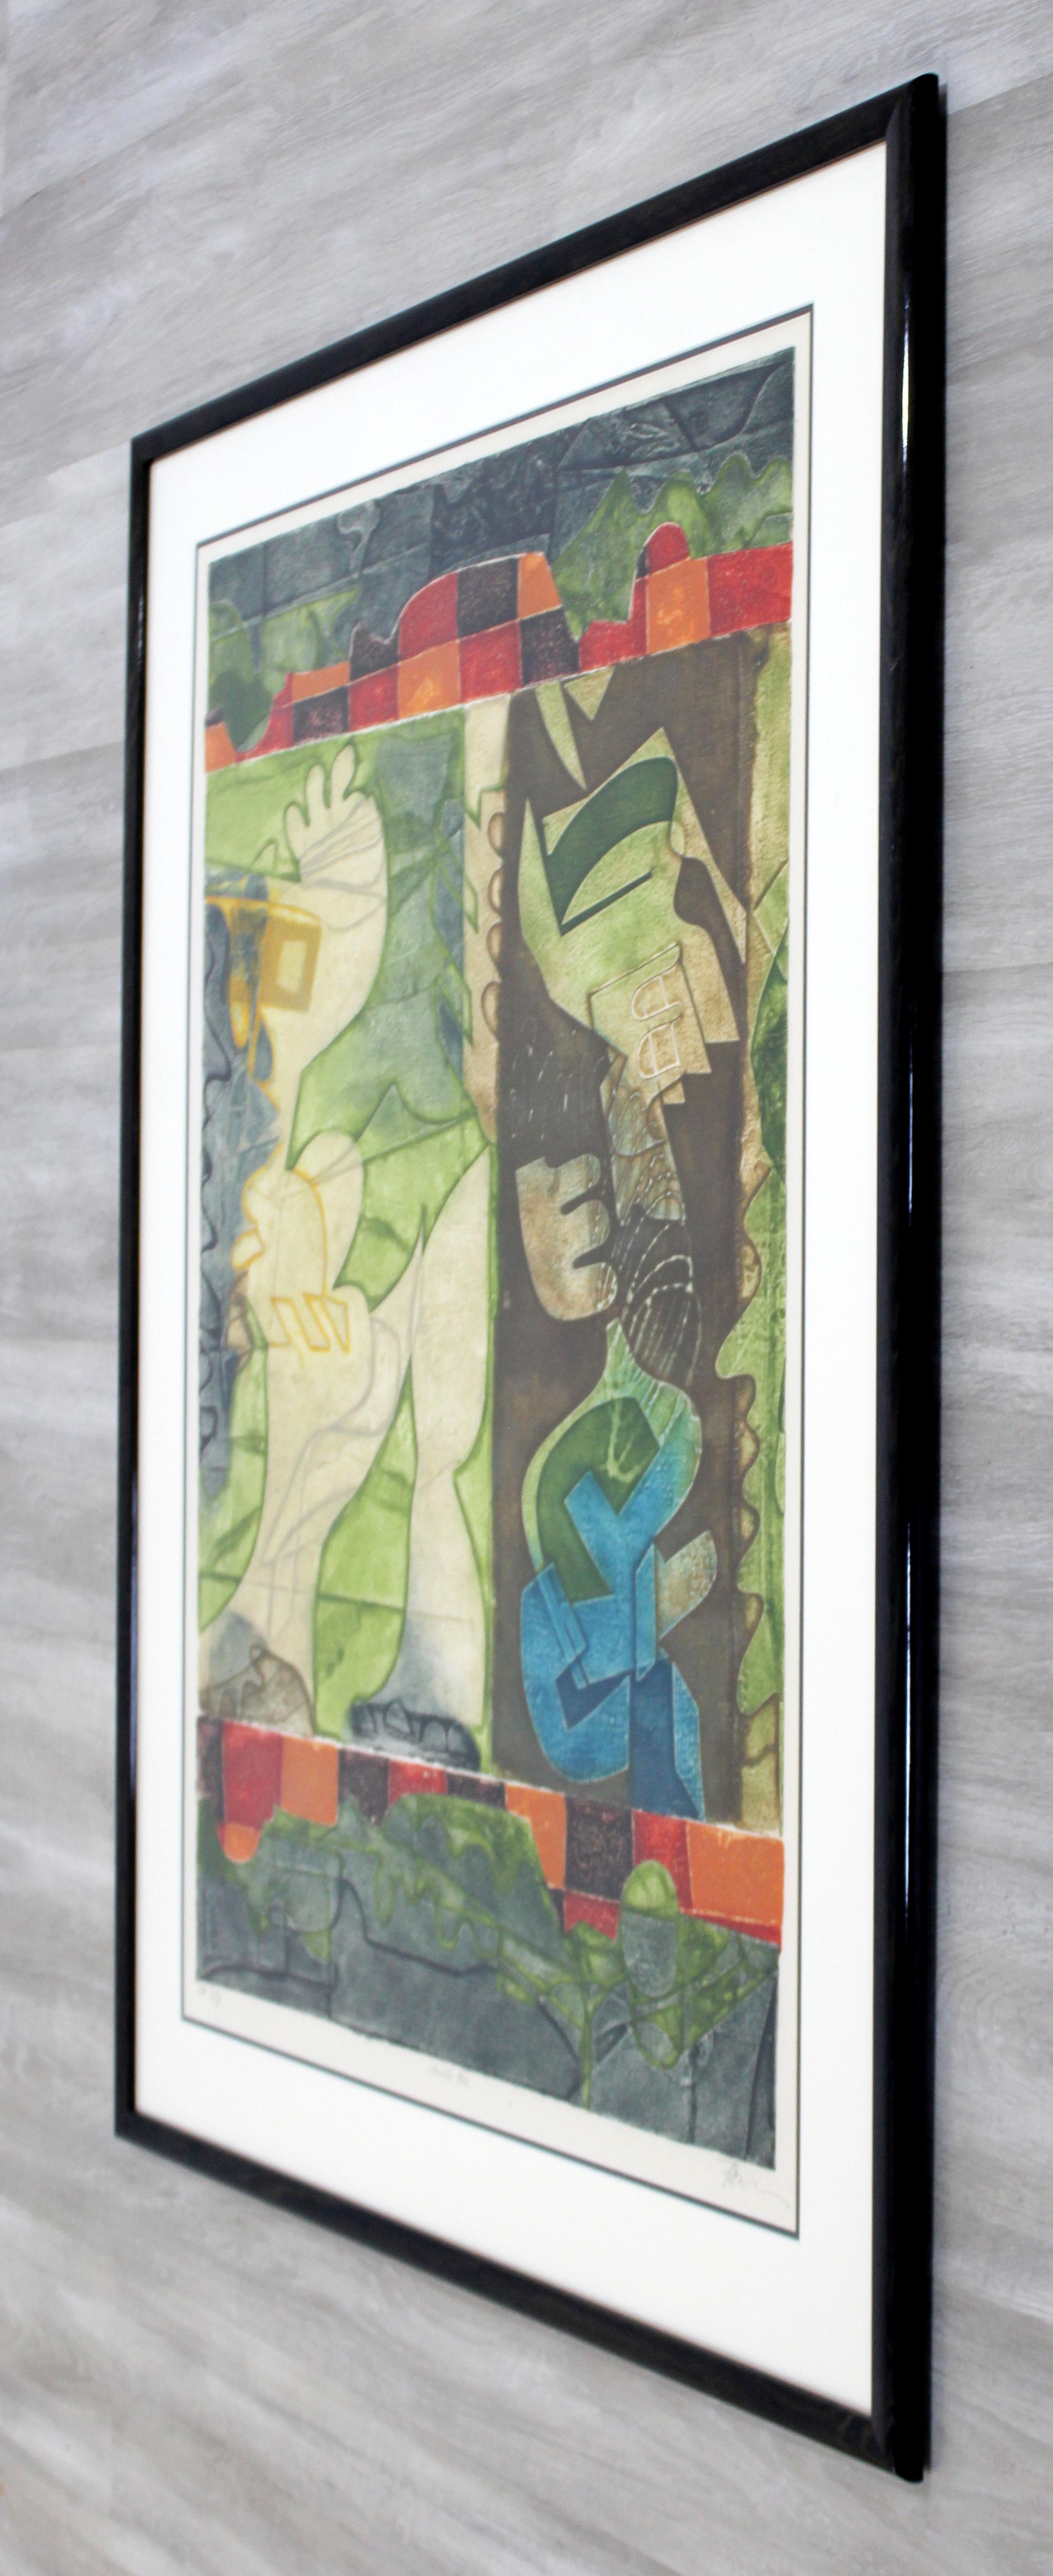 Mid-Century Modern Framed Embossed Etching Signed Gerard Fitremann E.A. 1/10 80s In Good Condition For Sale In Keego Harbor, MI